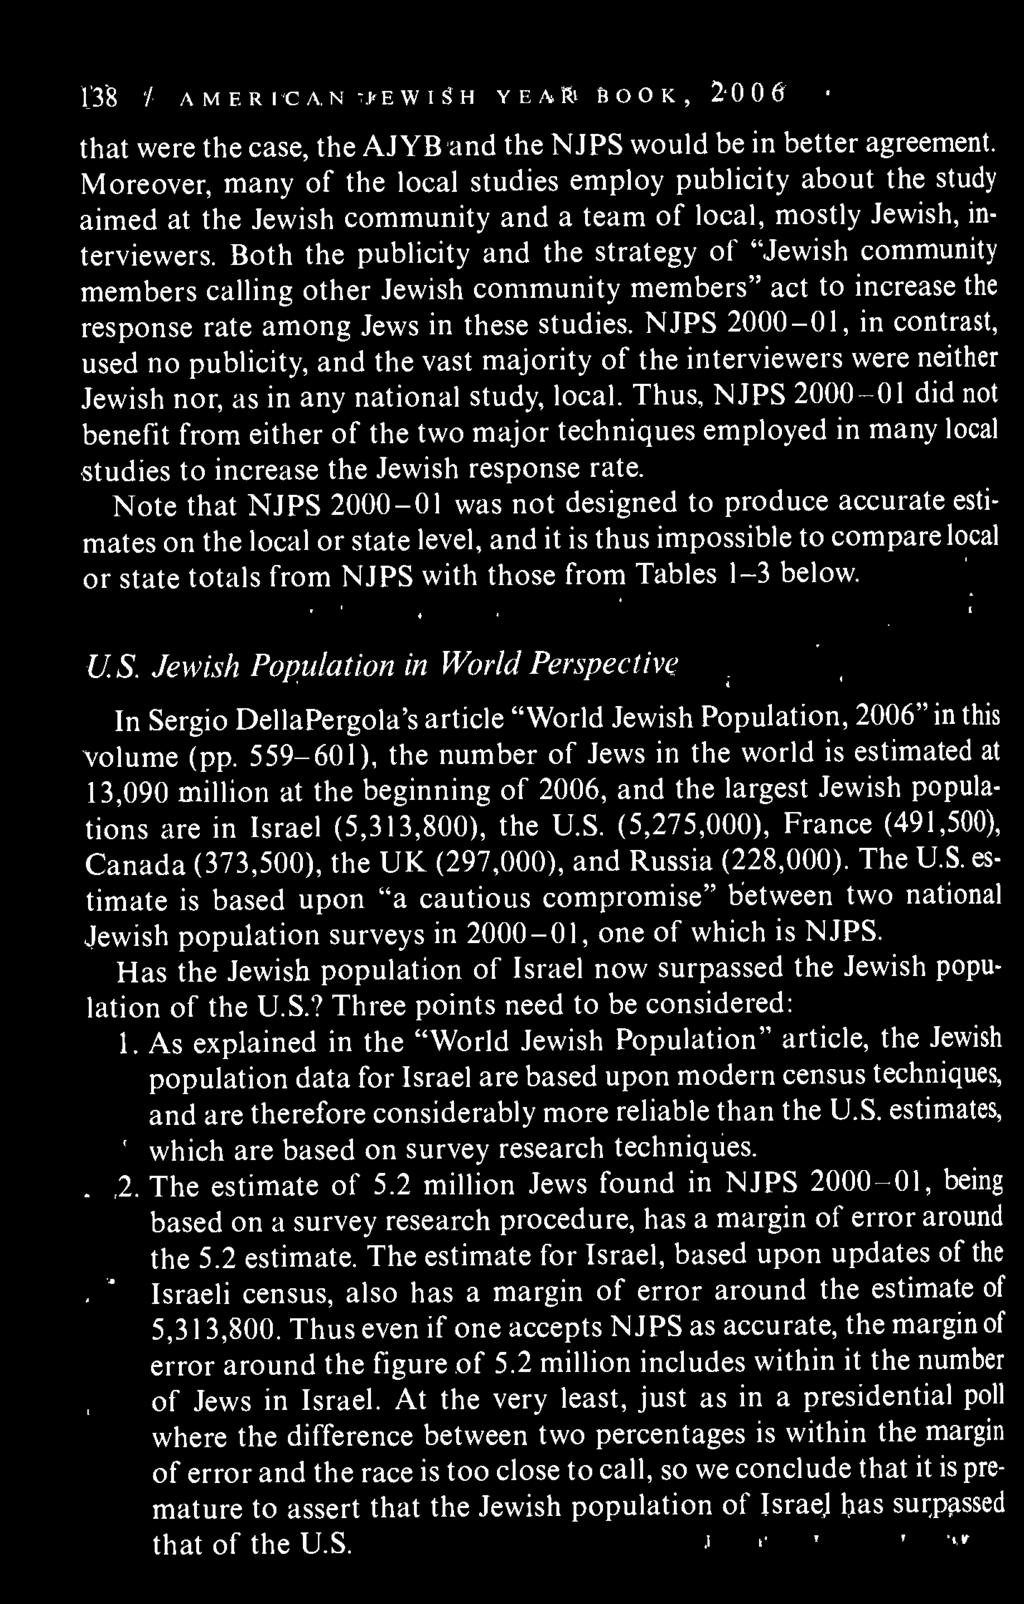 Thus, NJPS 2000 01 did benefit from either of the two major techniques employed in many b studies to increase the Jewish response rate.